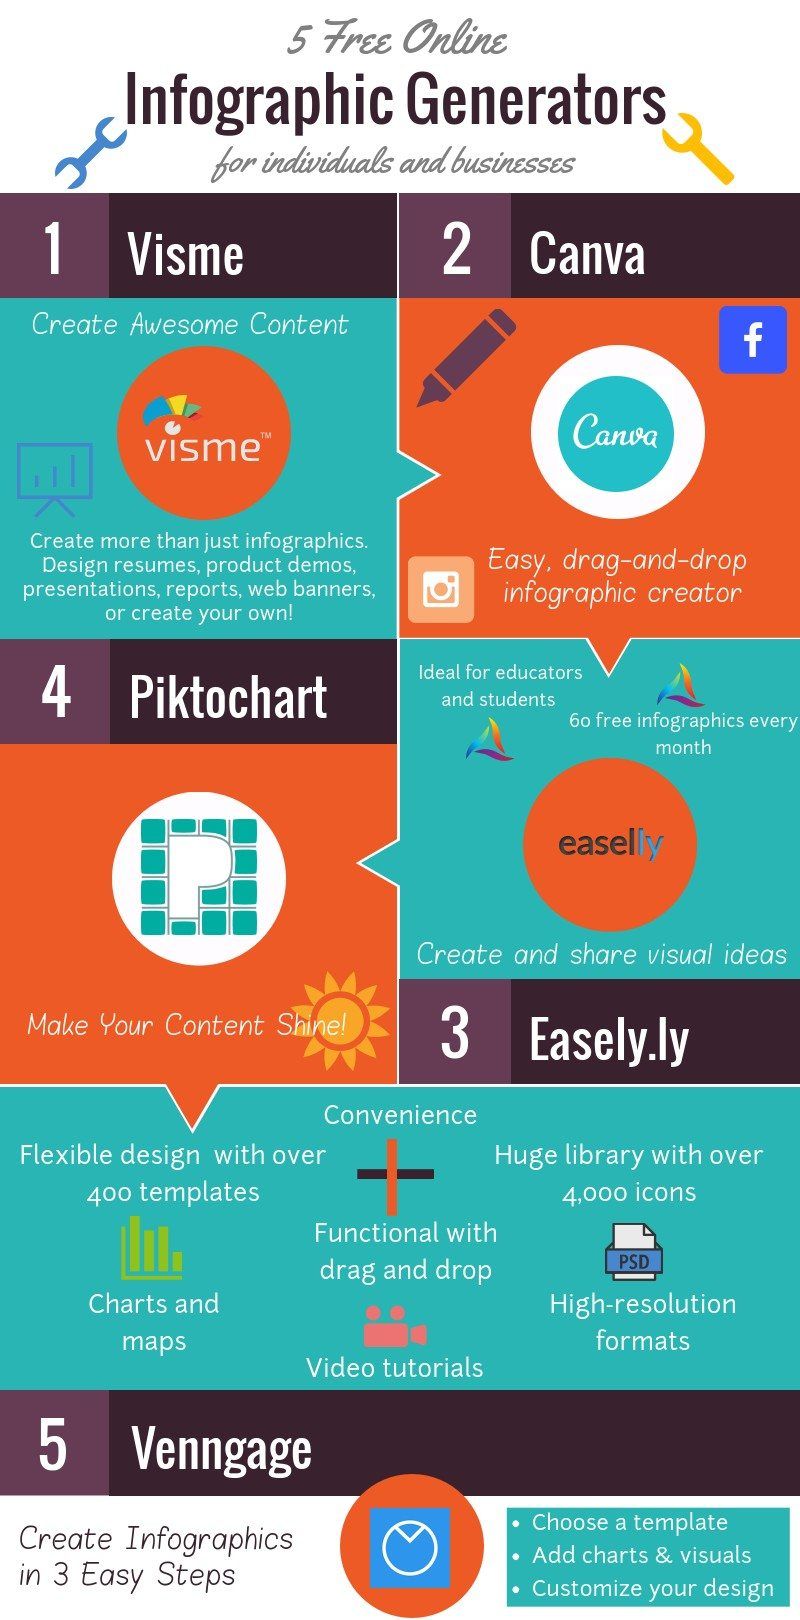 7 Things You Didnt Know You Could Make Into an Infographic